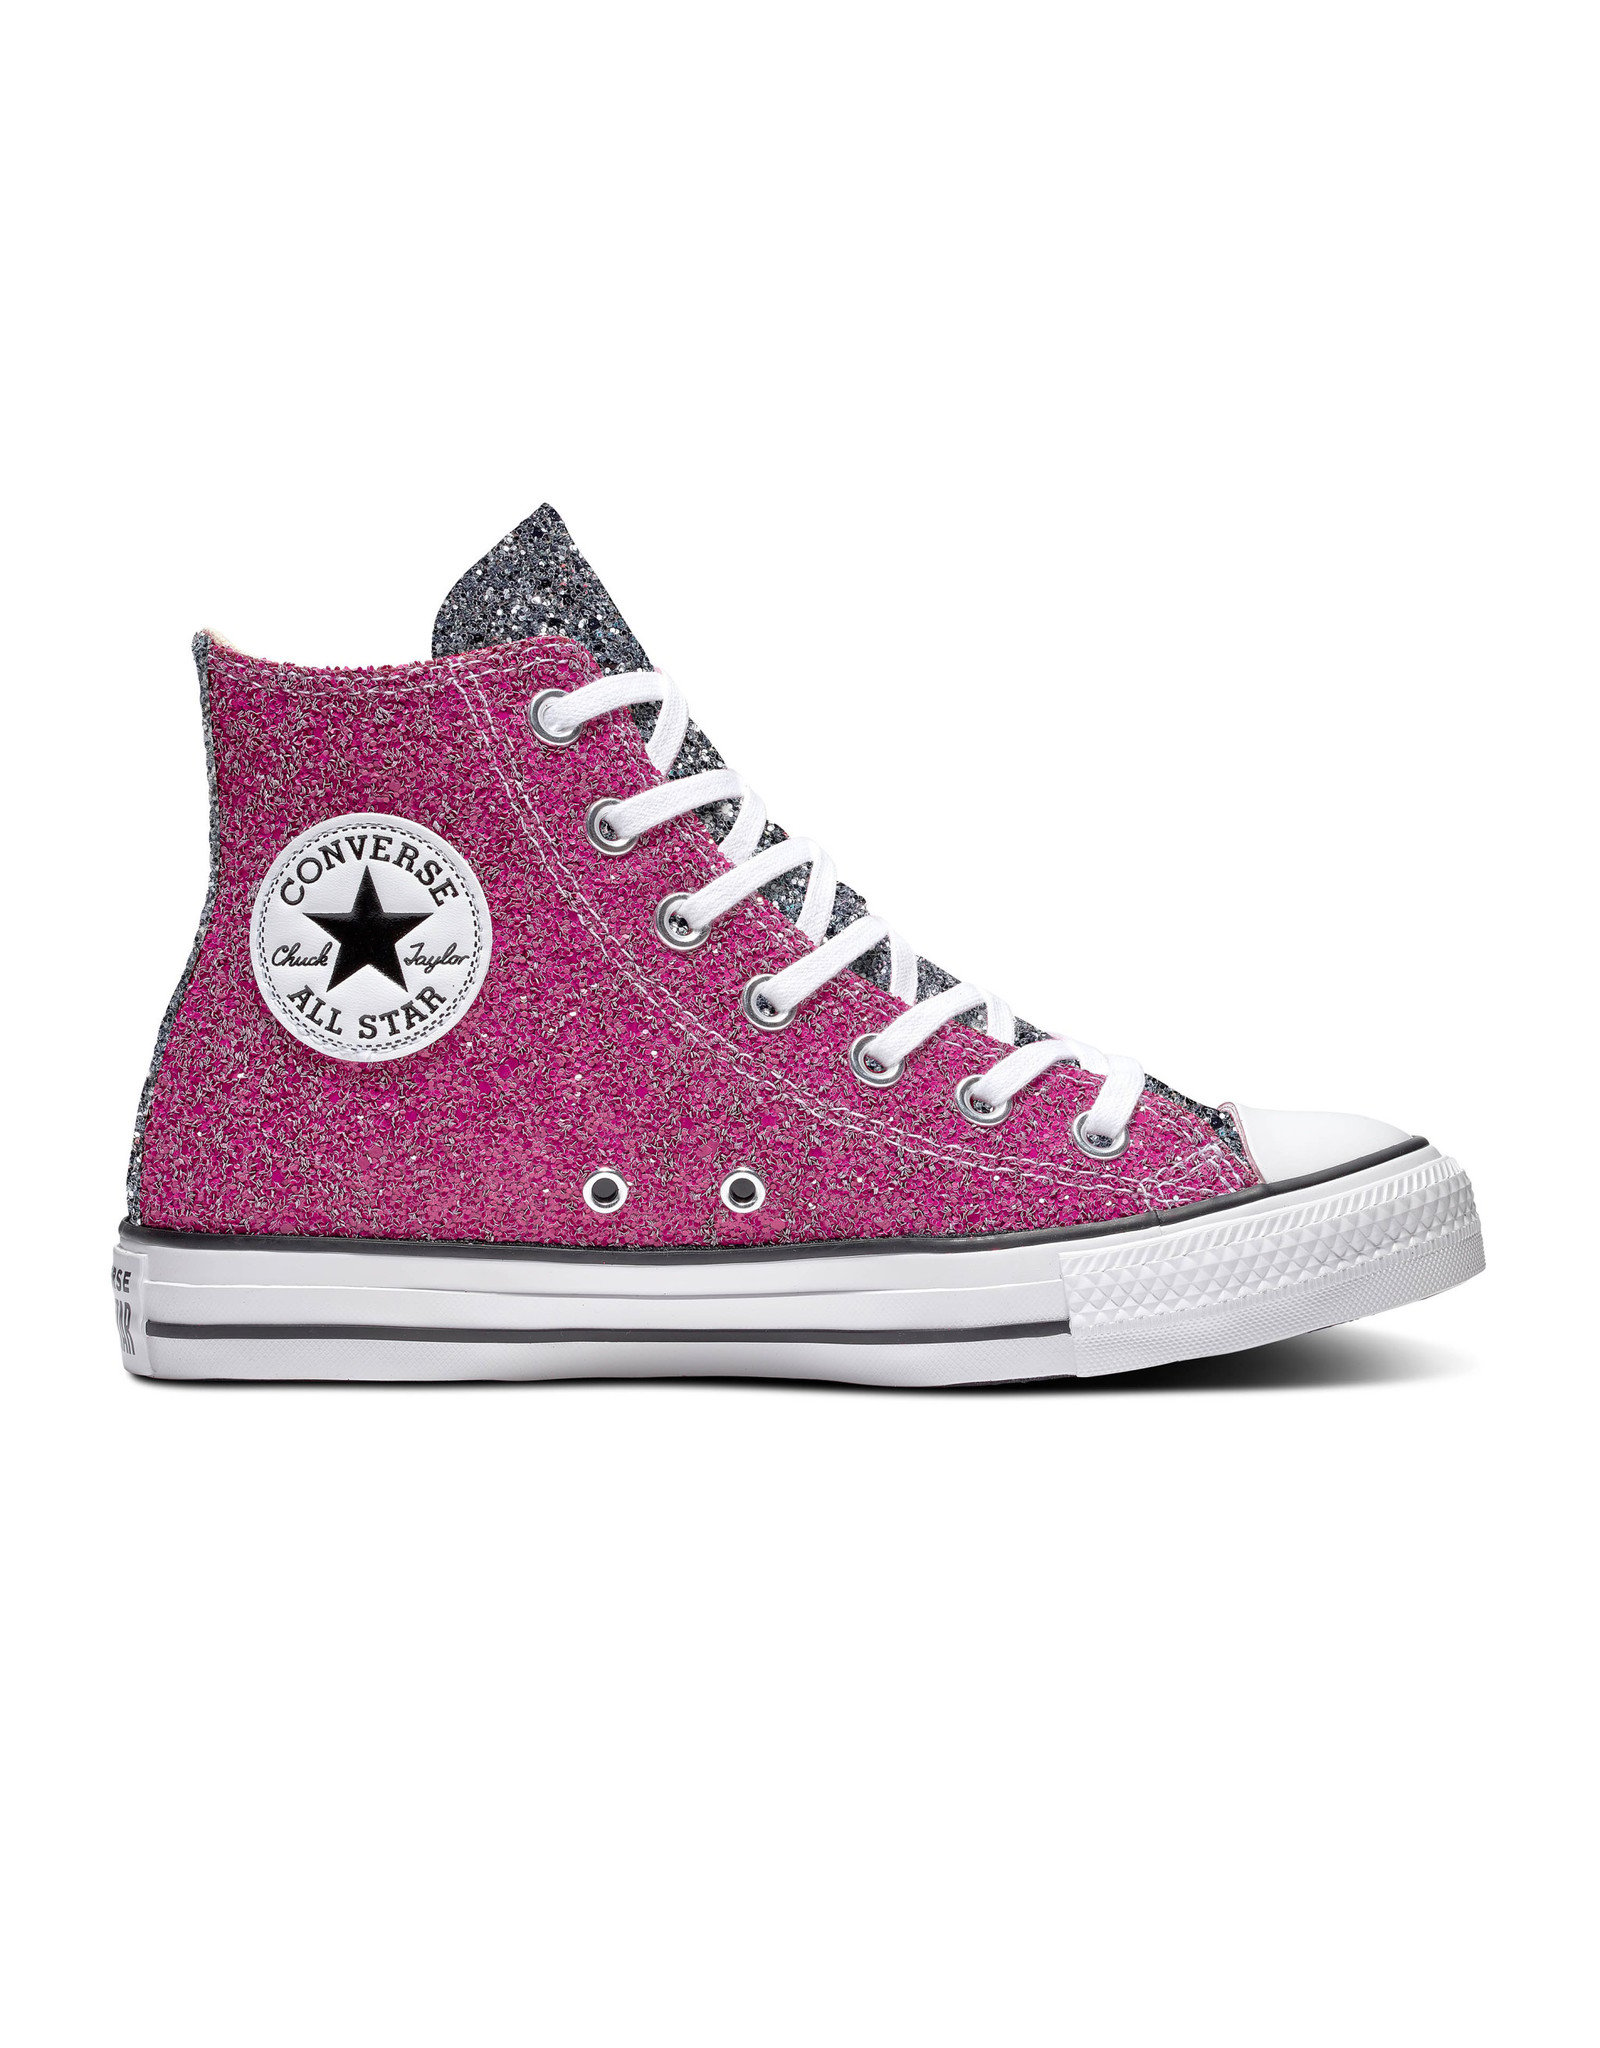 CONVERSE CHUCK TAYLOR ALL STAR HI PINK/SILVER/WHITE C19PS-566269C